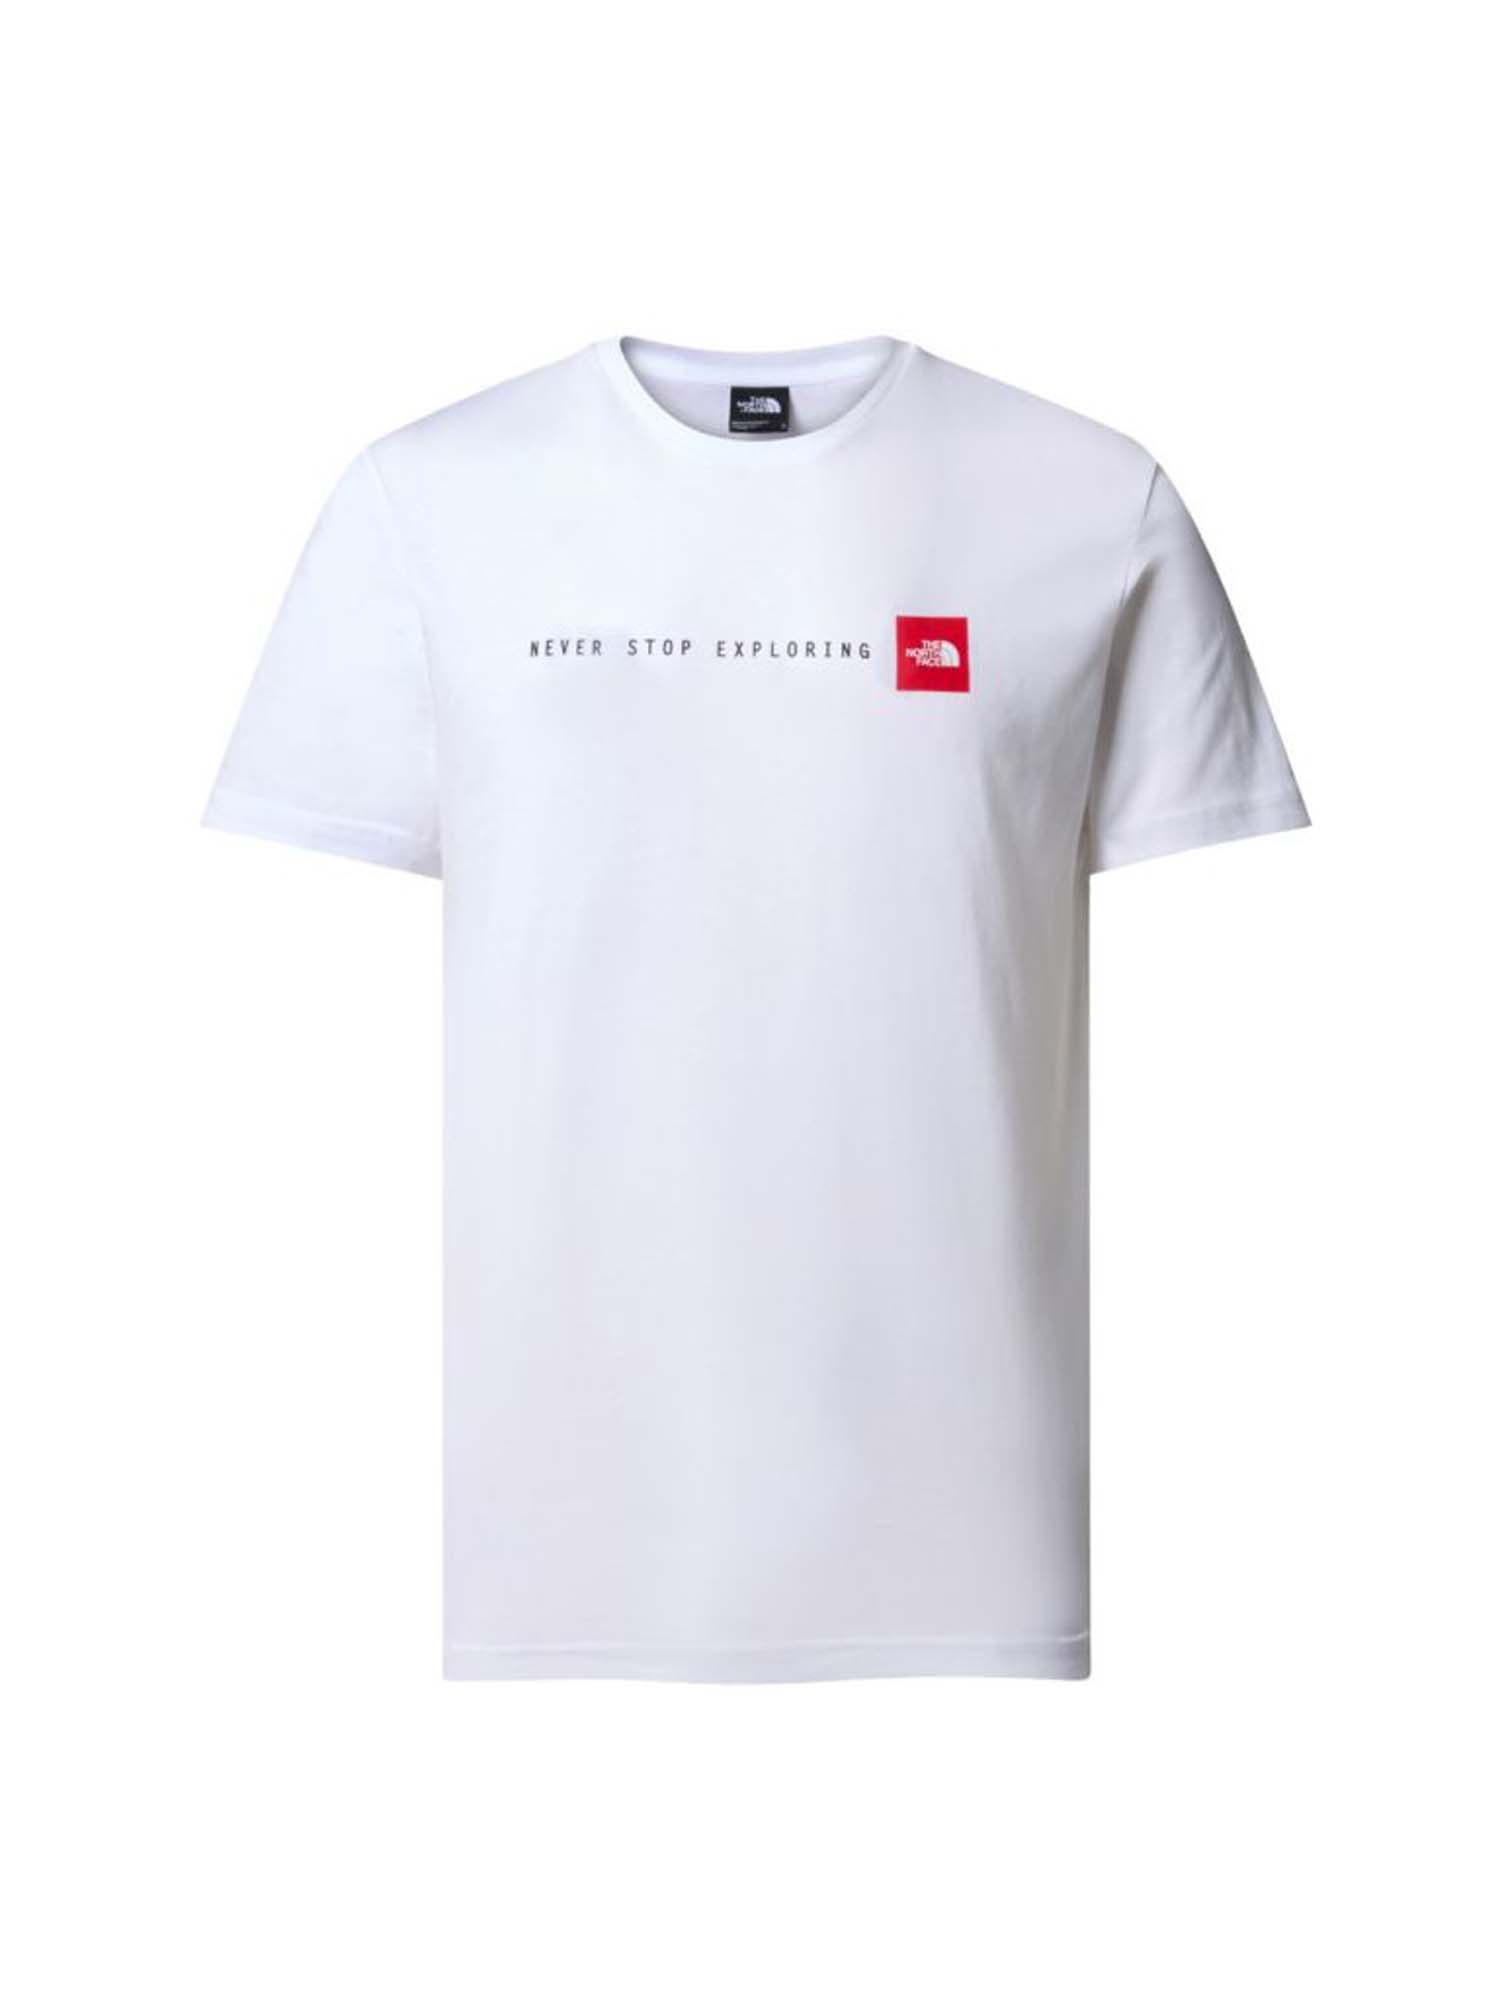 THE NORTH FACE M s/s nse tee